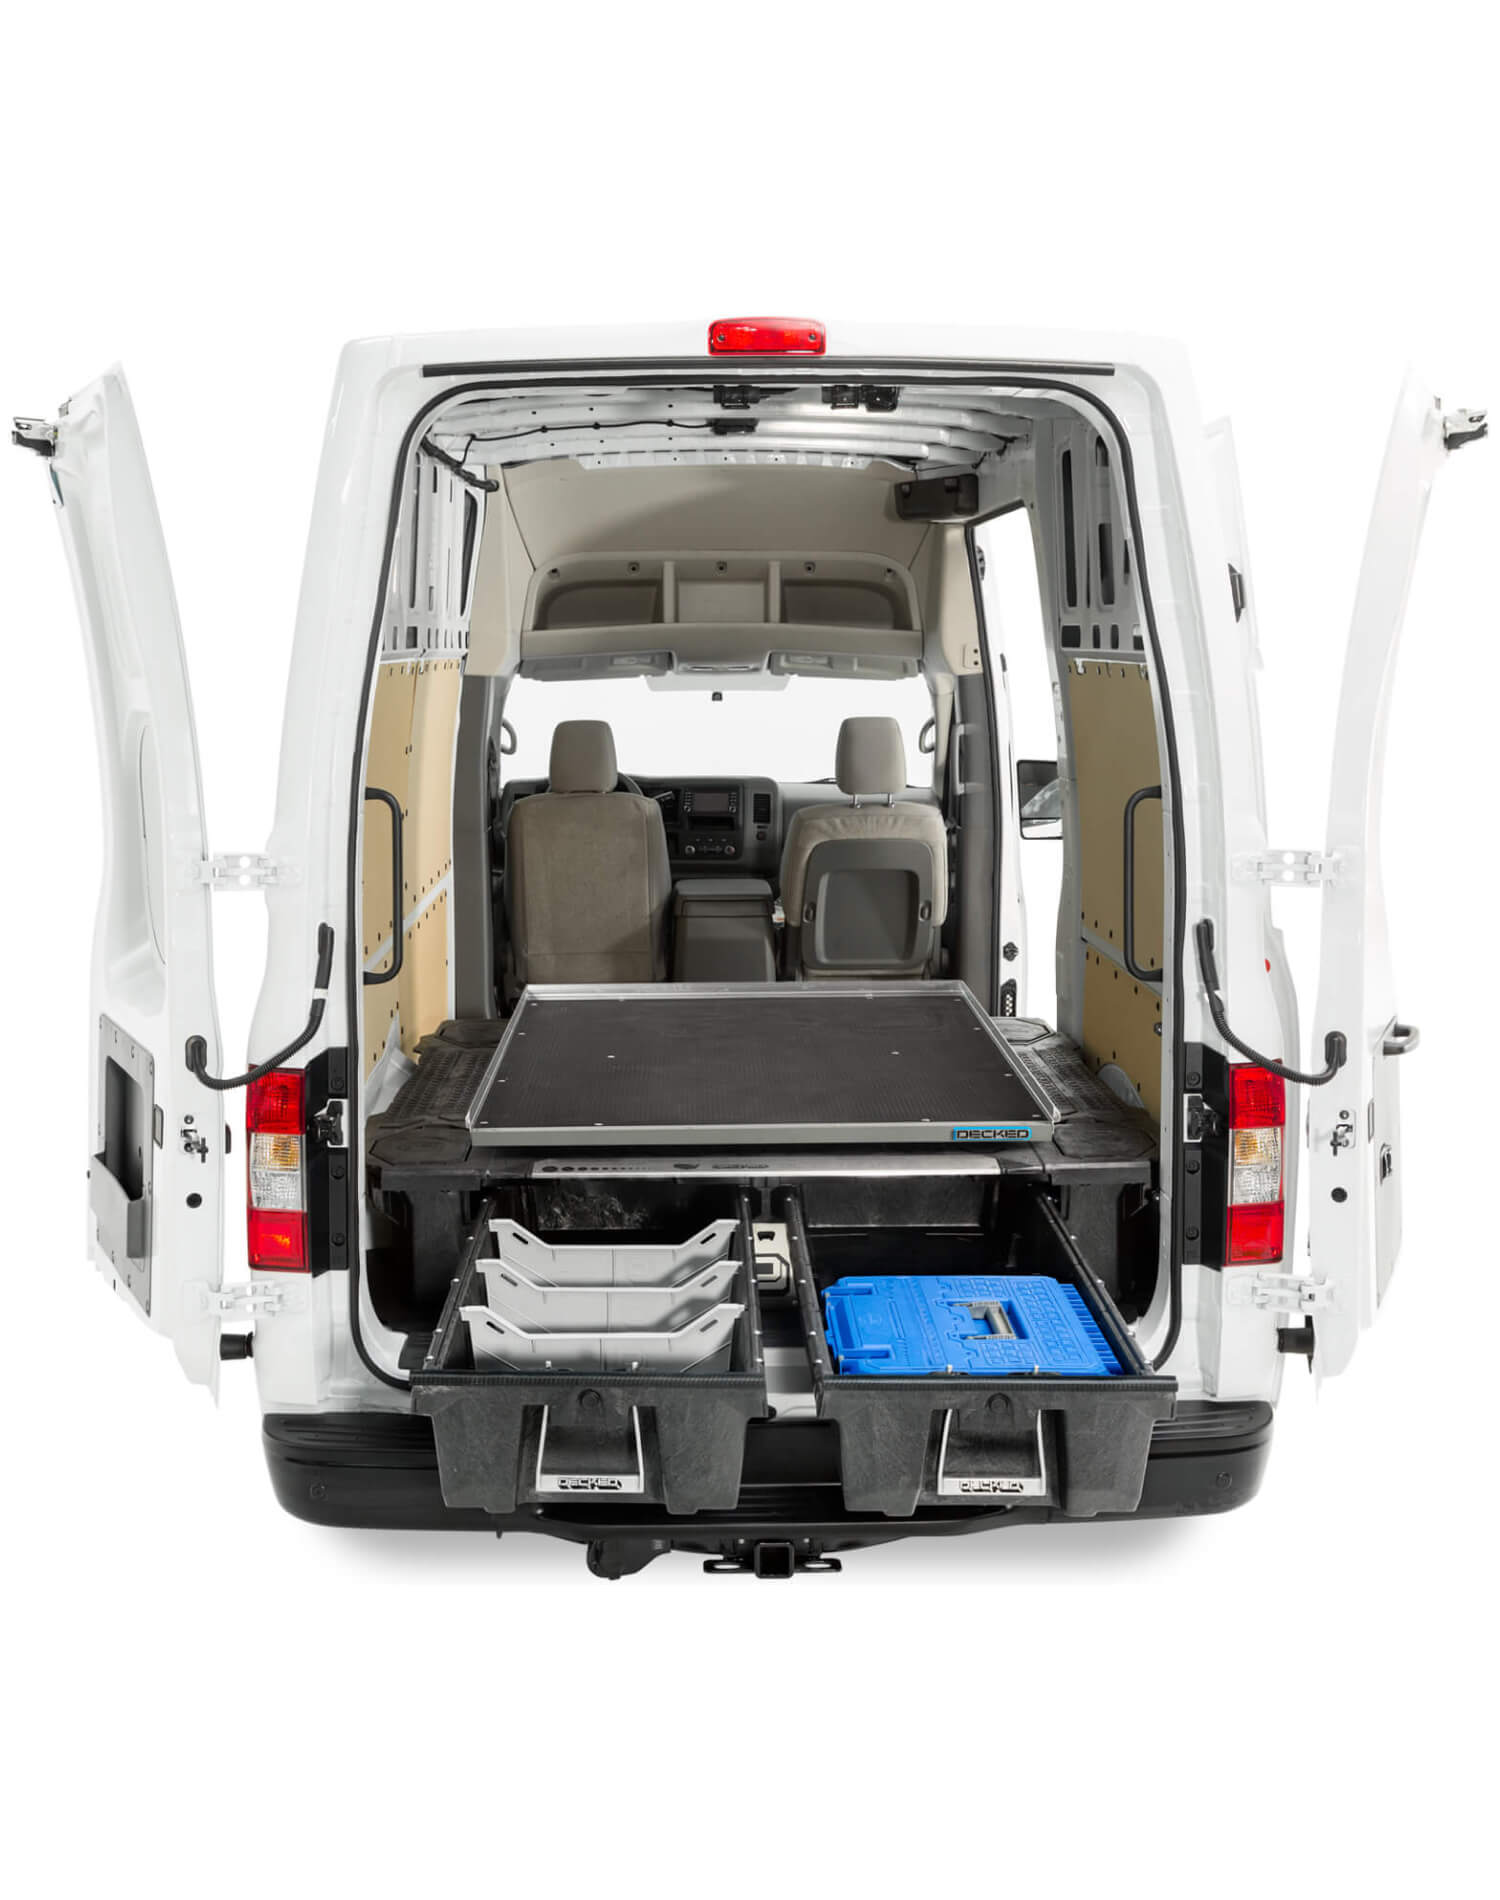 Studio image of a cargo van with CargoGlide and a drawer system